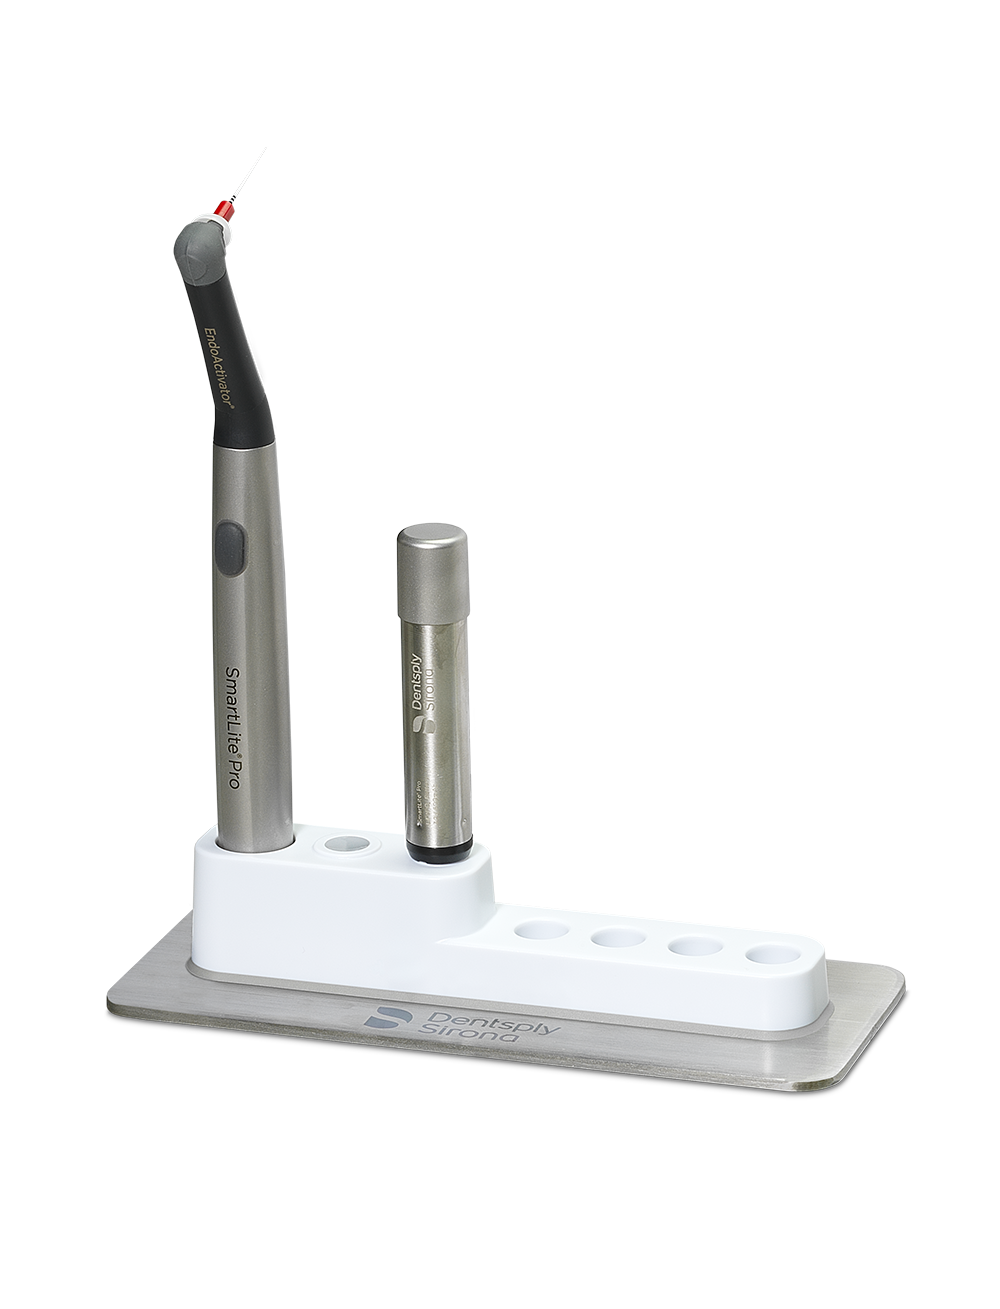 5Ws* SmartLite Pro EndoActivator™ from Dentsply Sirona